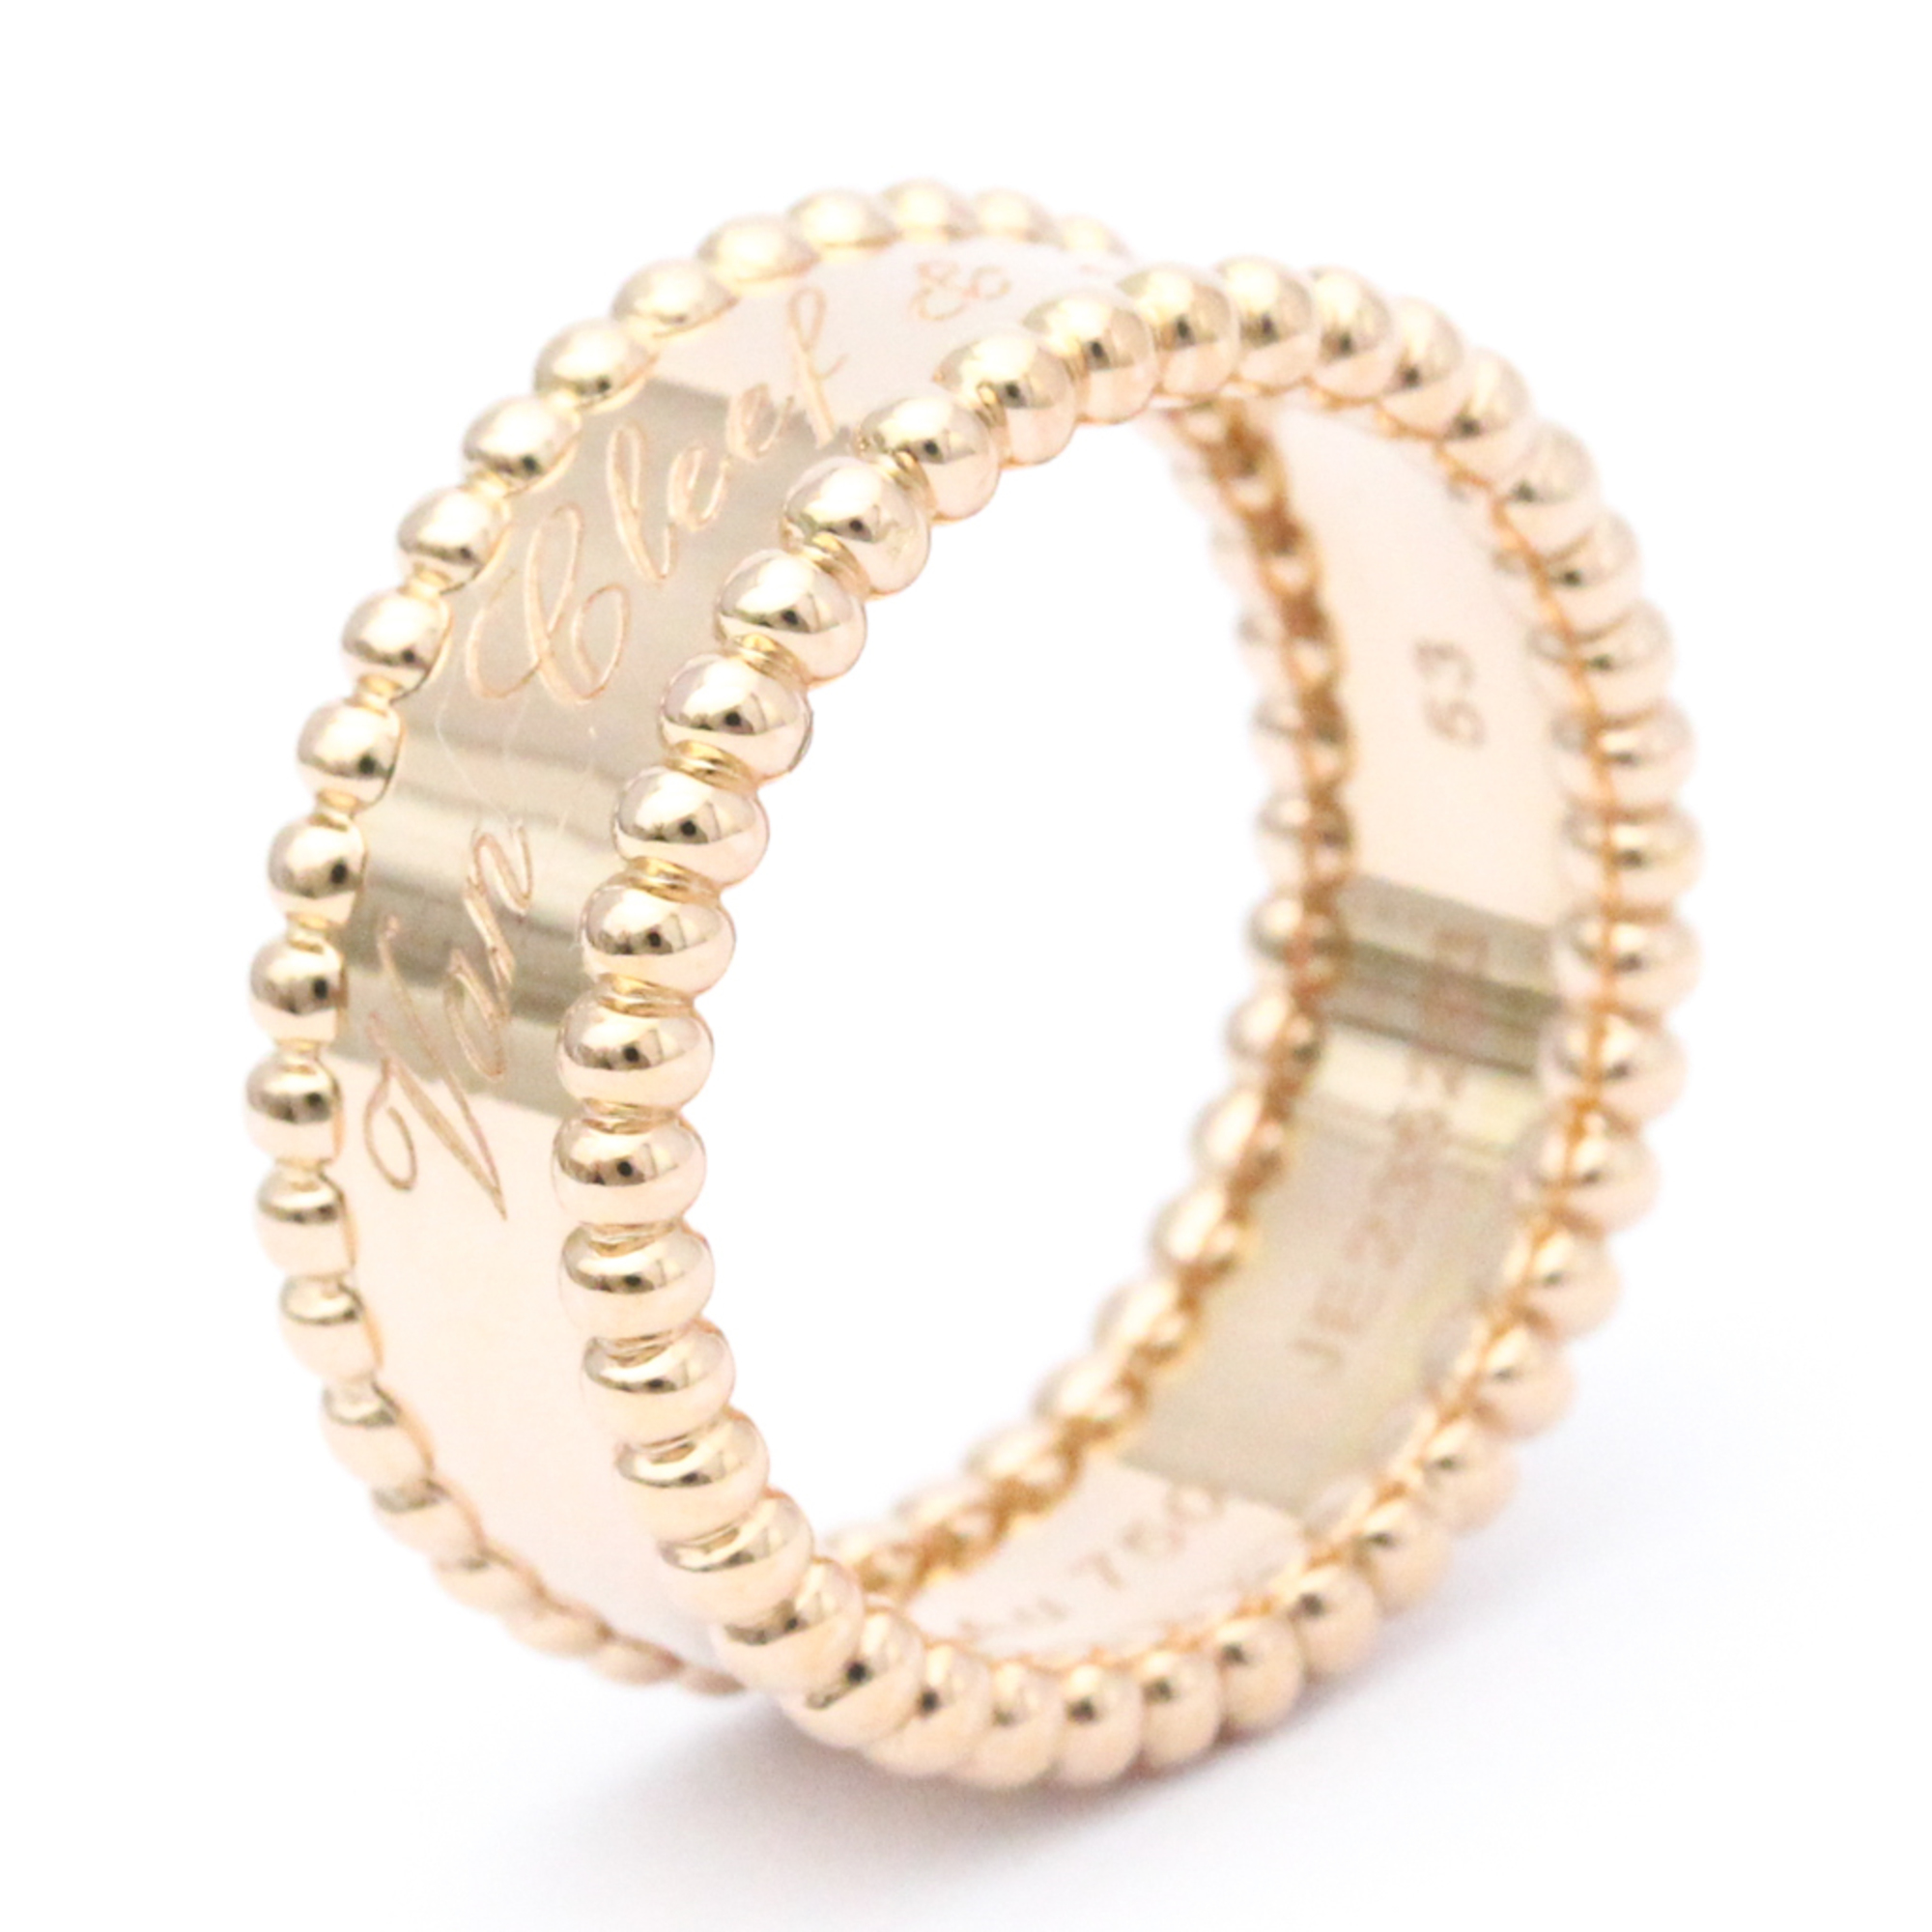 Van Cleef & Arpels Perlée Signature Ring Pink Gold (18K) Fashion No Stone Band Ring Pink Gold